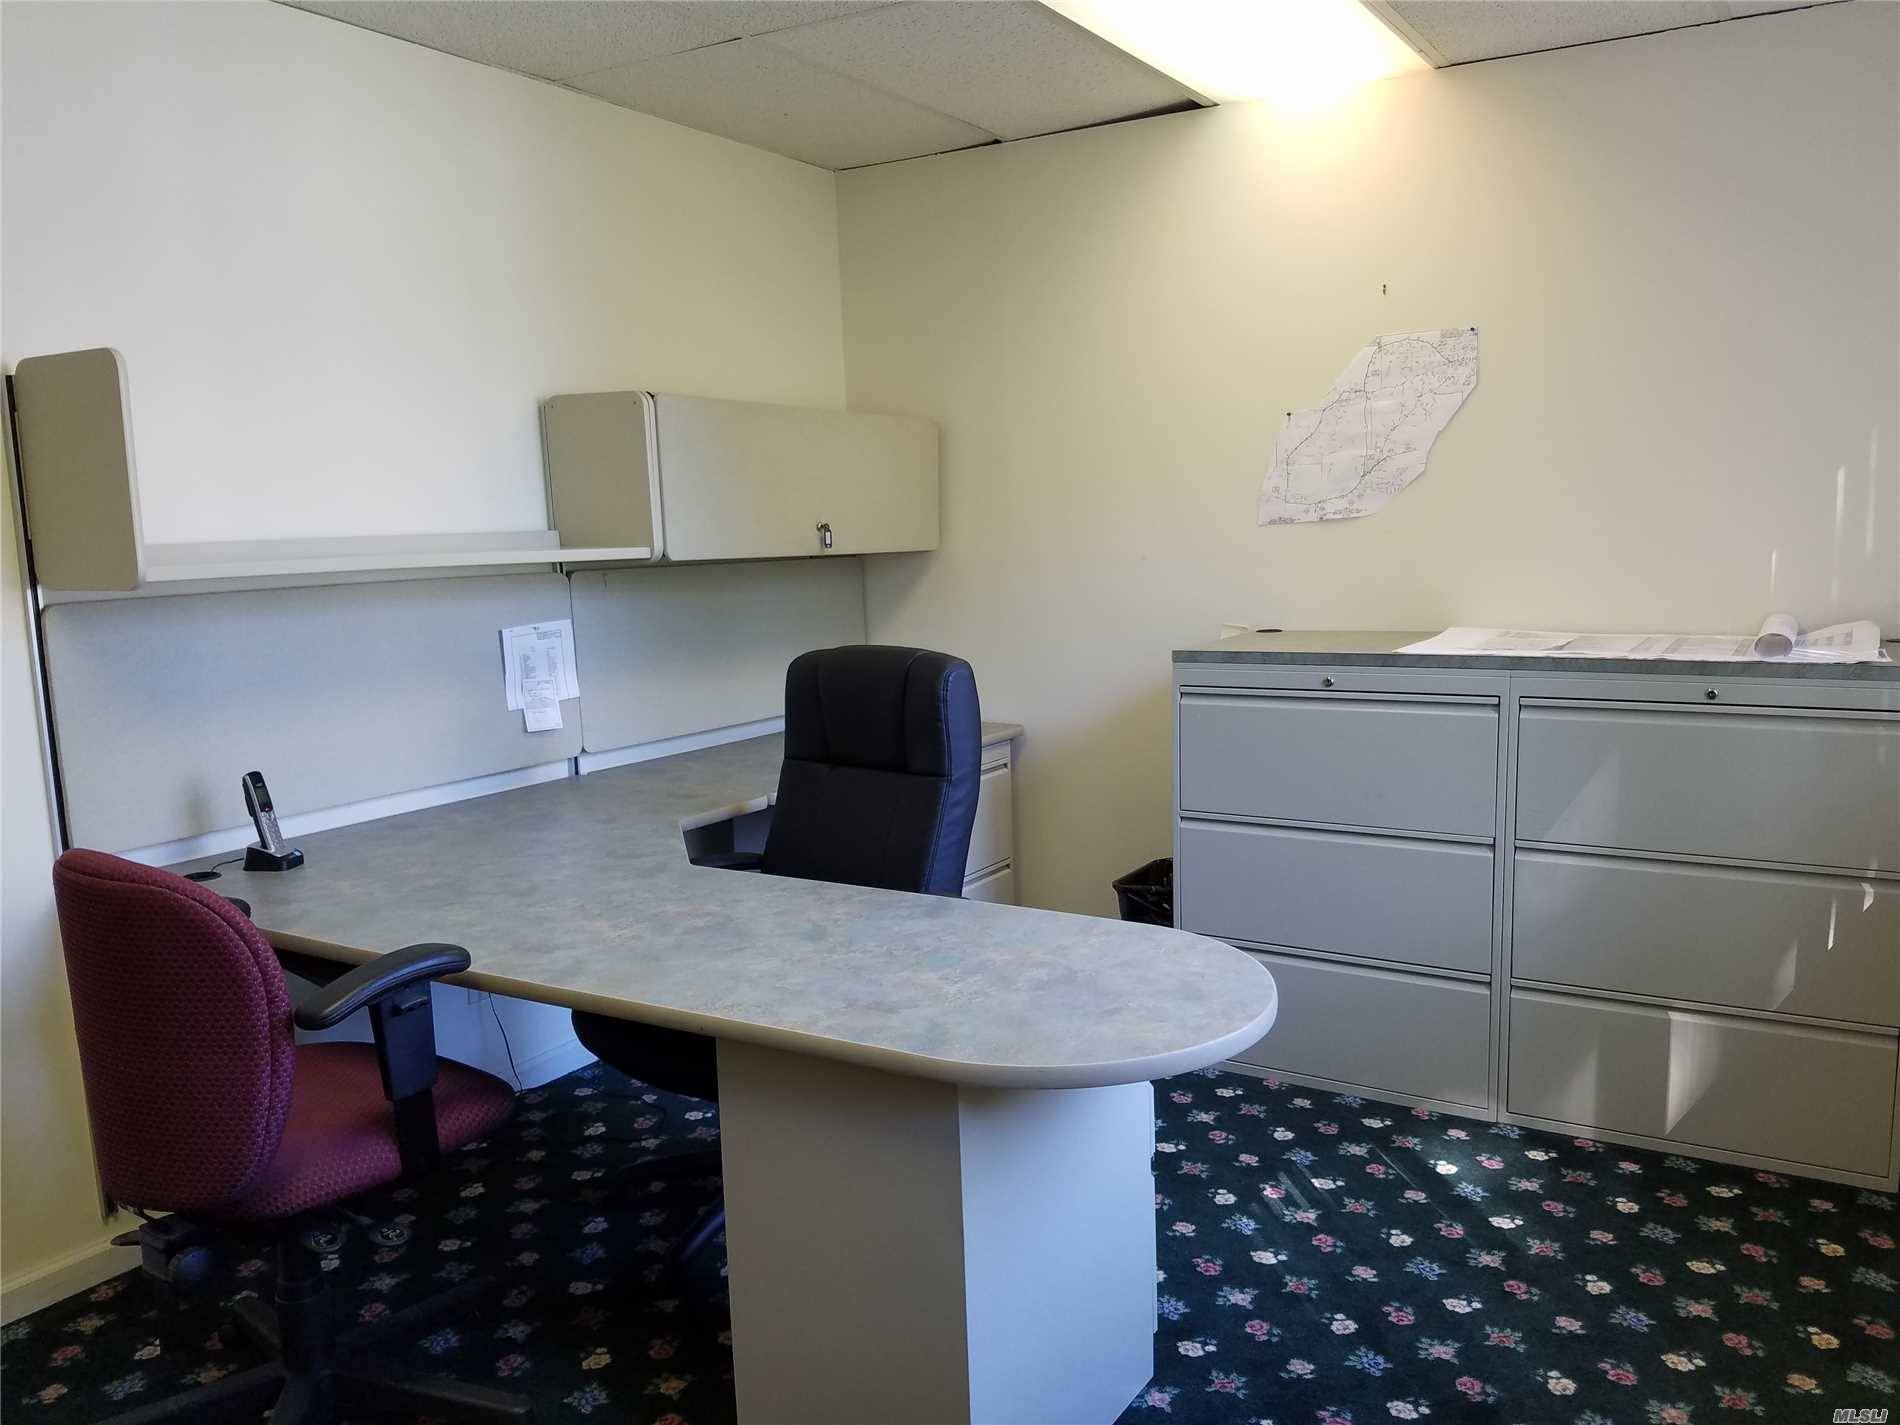 Fully Furnished Office Space Located In Huntington On 25A With Private Parking Lot !